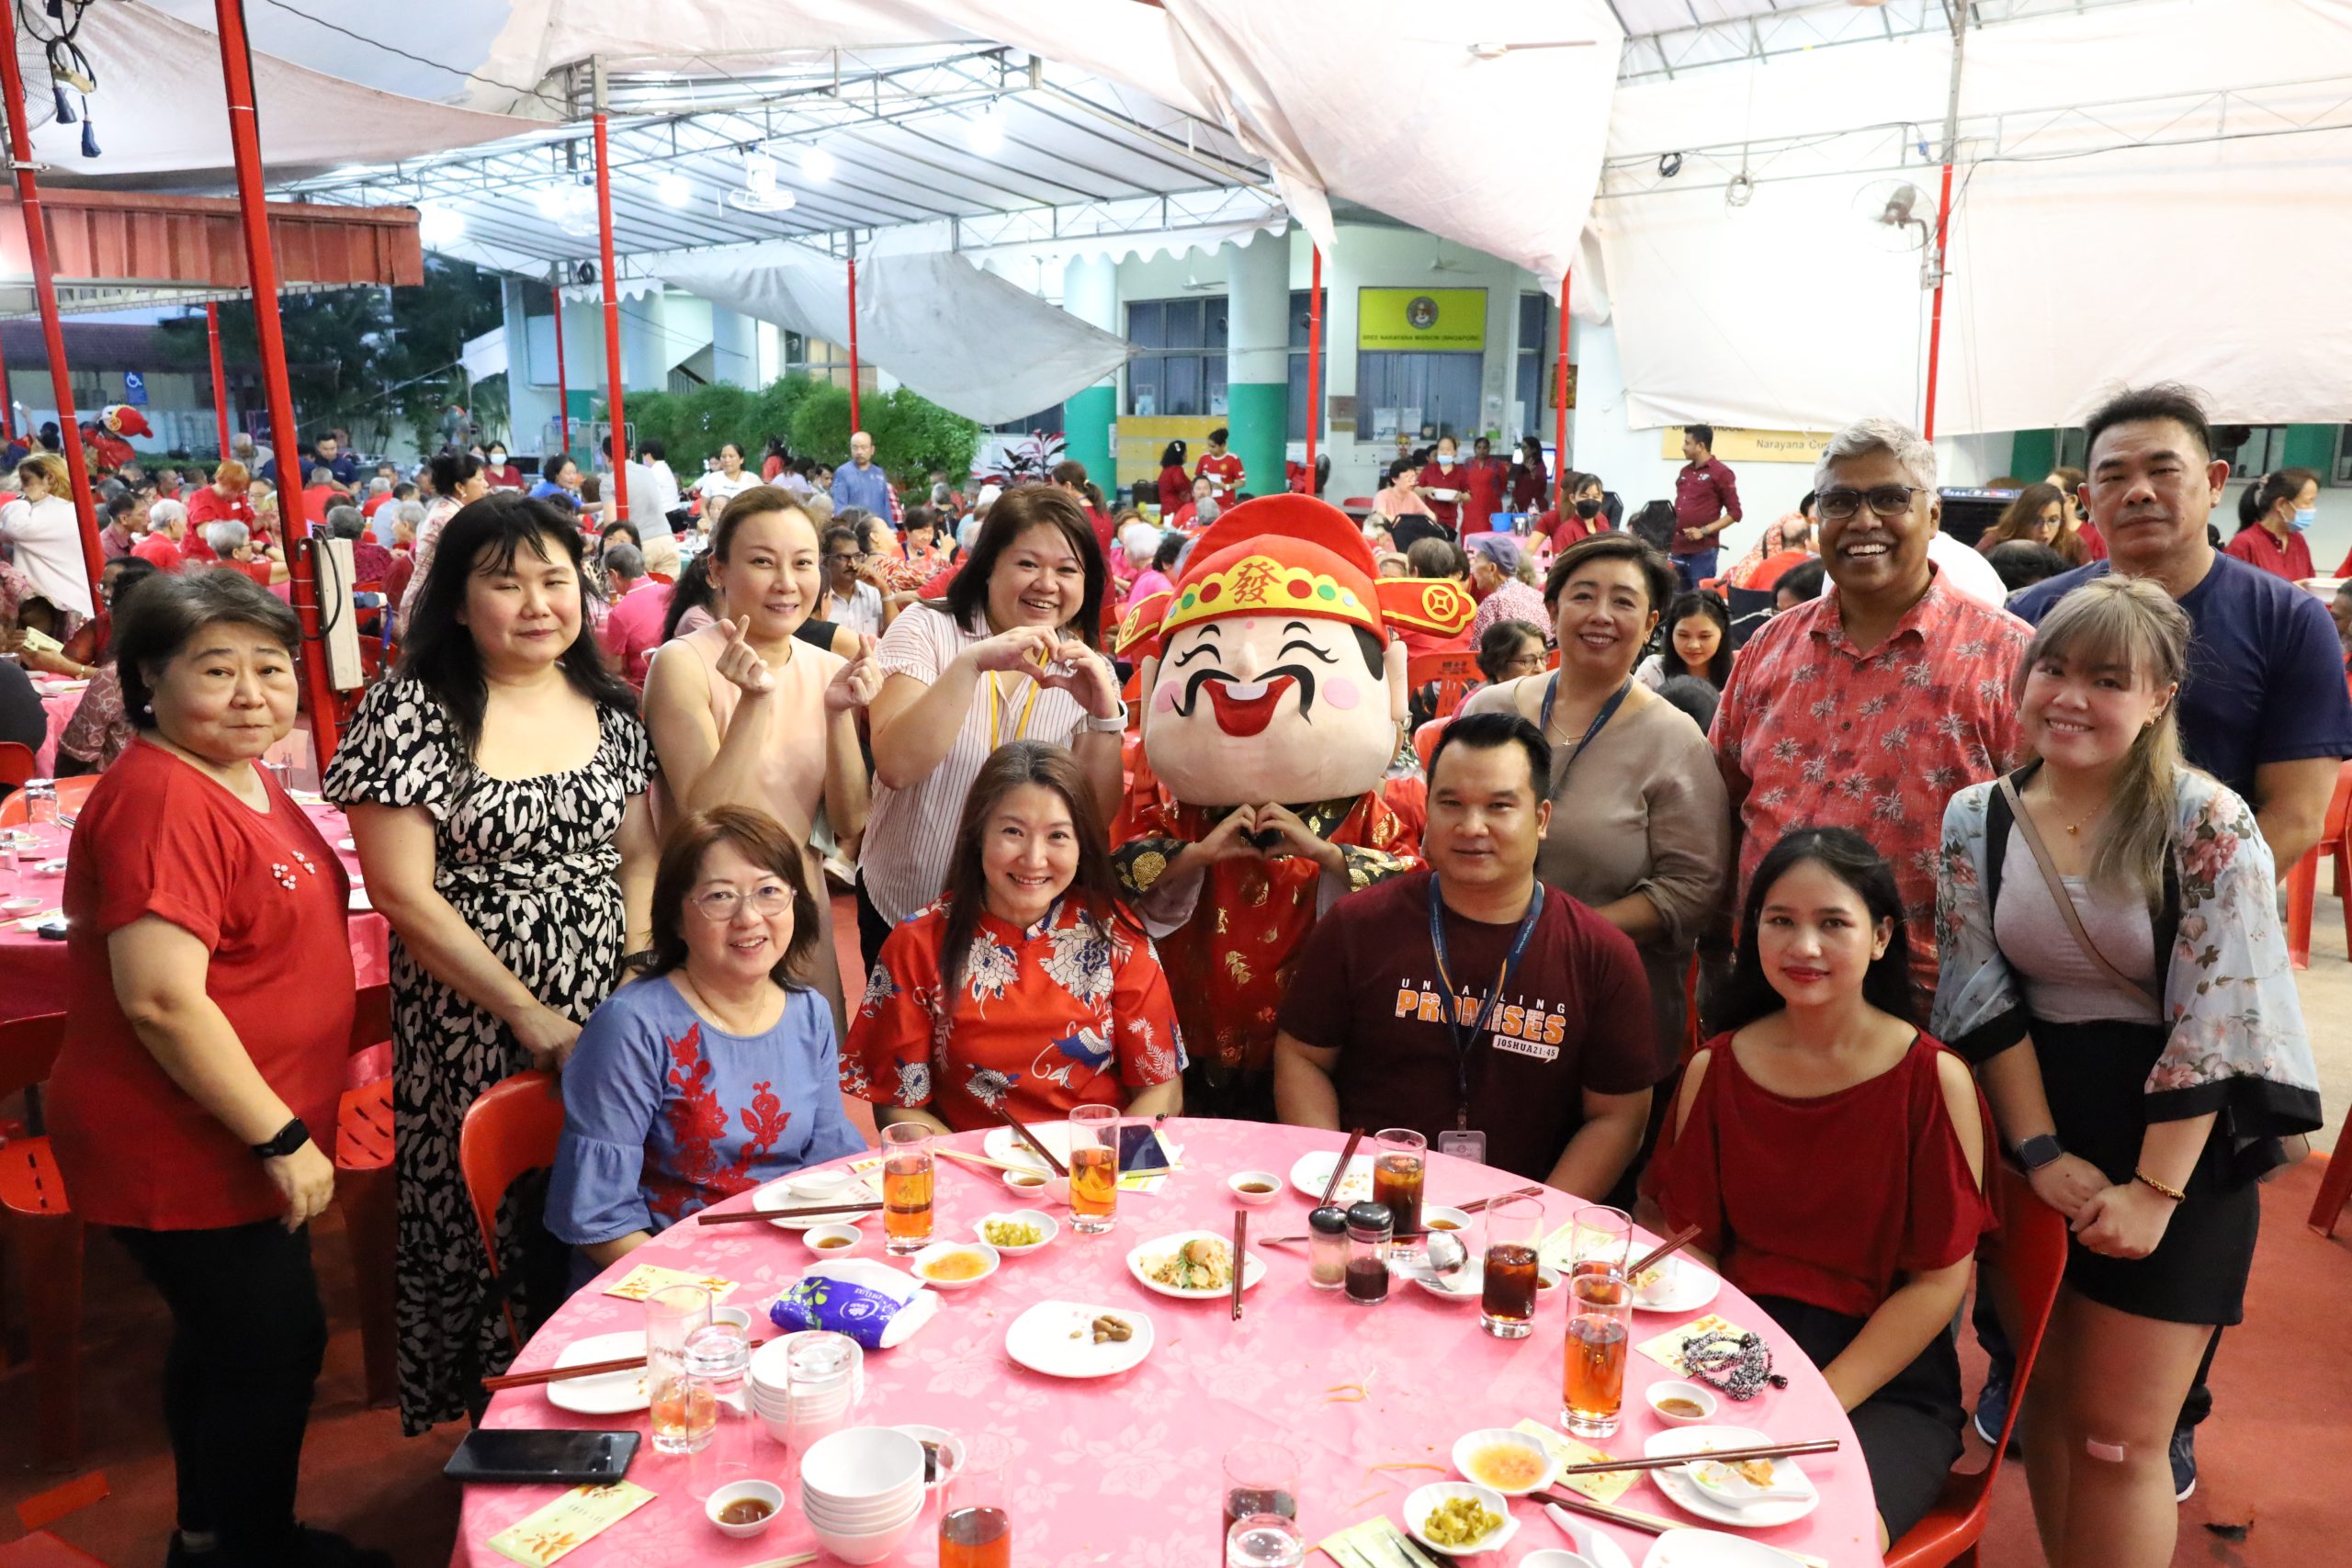 CNY celebrations with the Heartwarmers